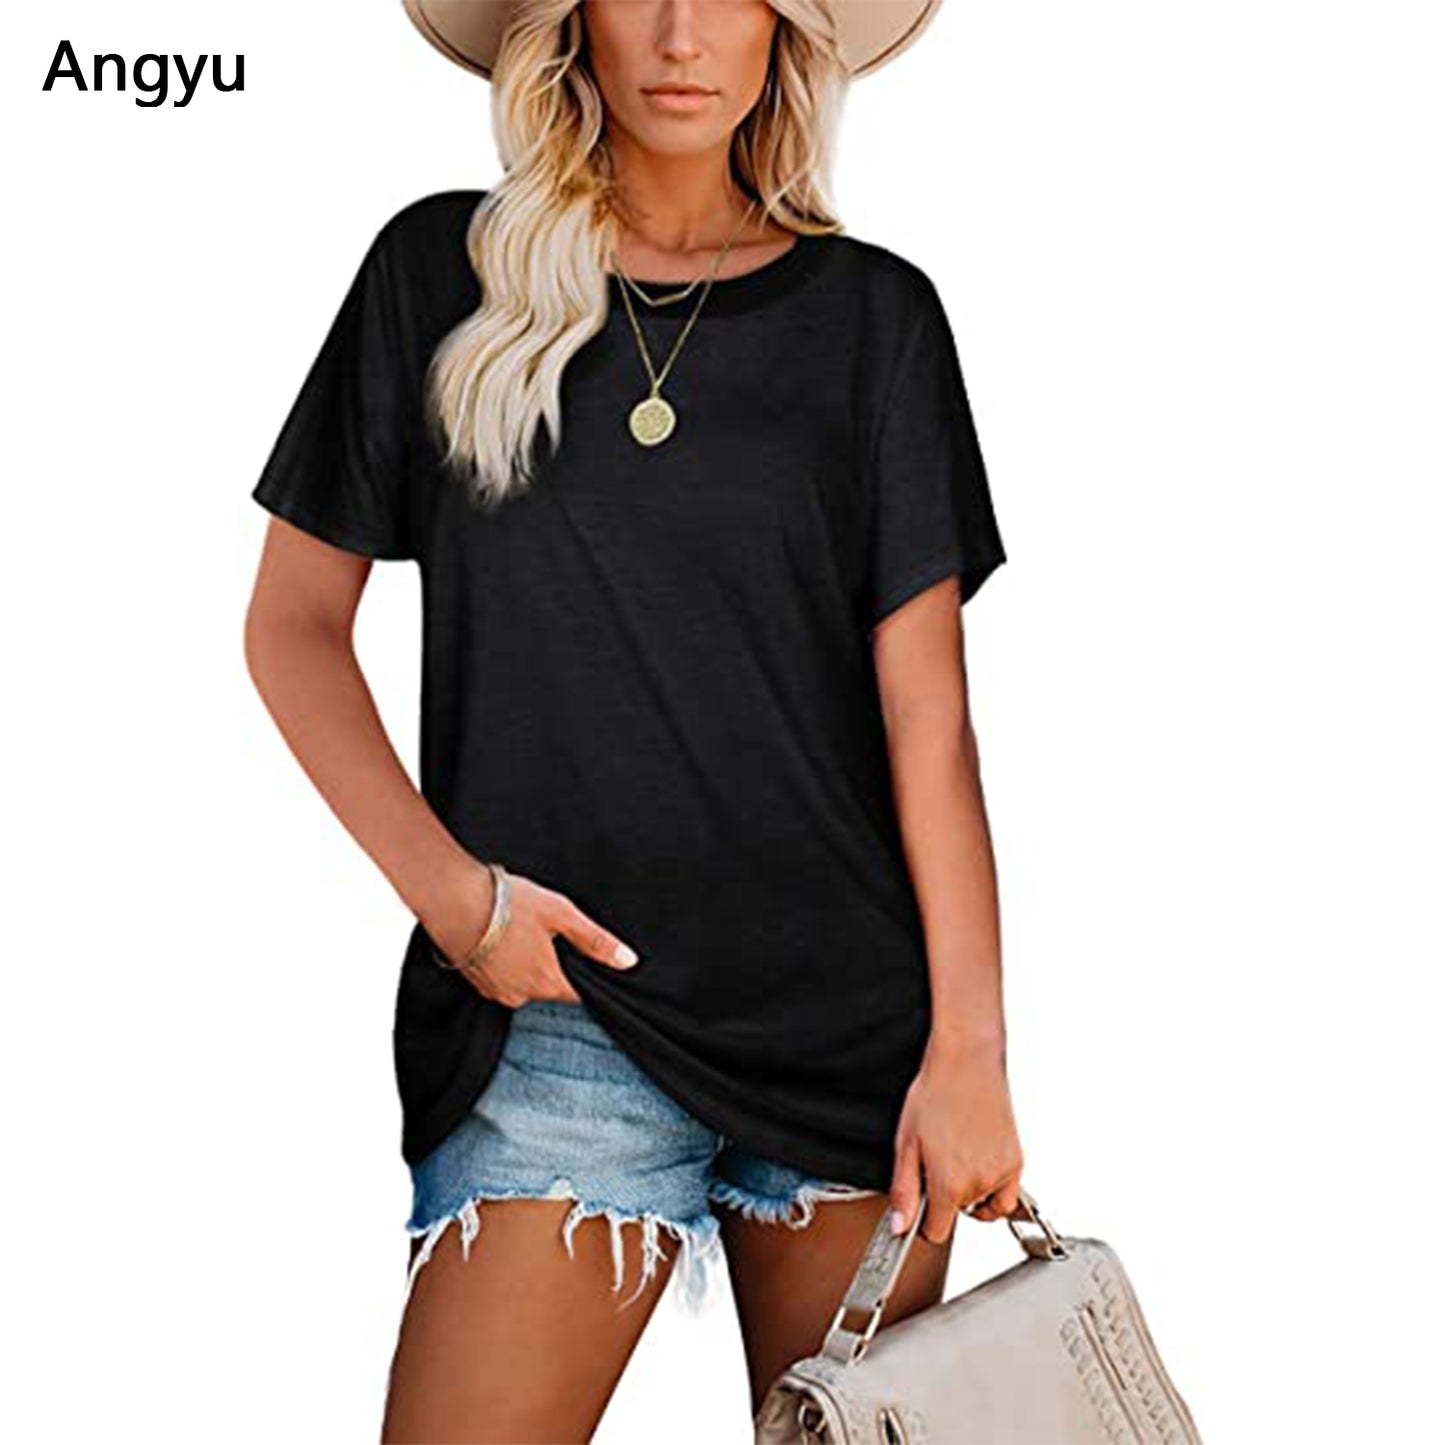 Angyu Summer Tops for Women Crewneck Loose Fit Soft